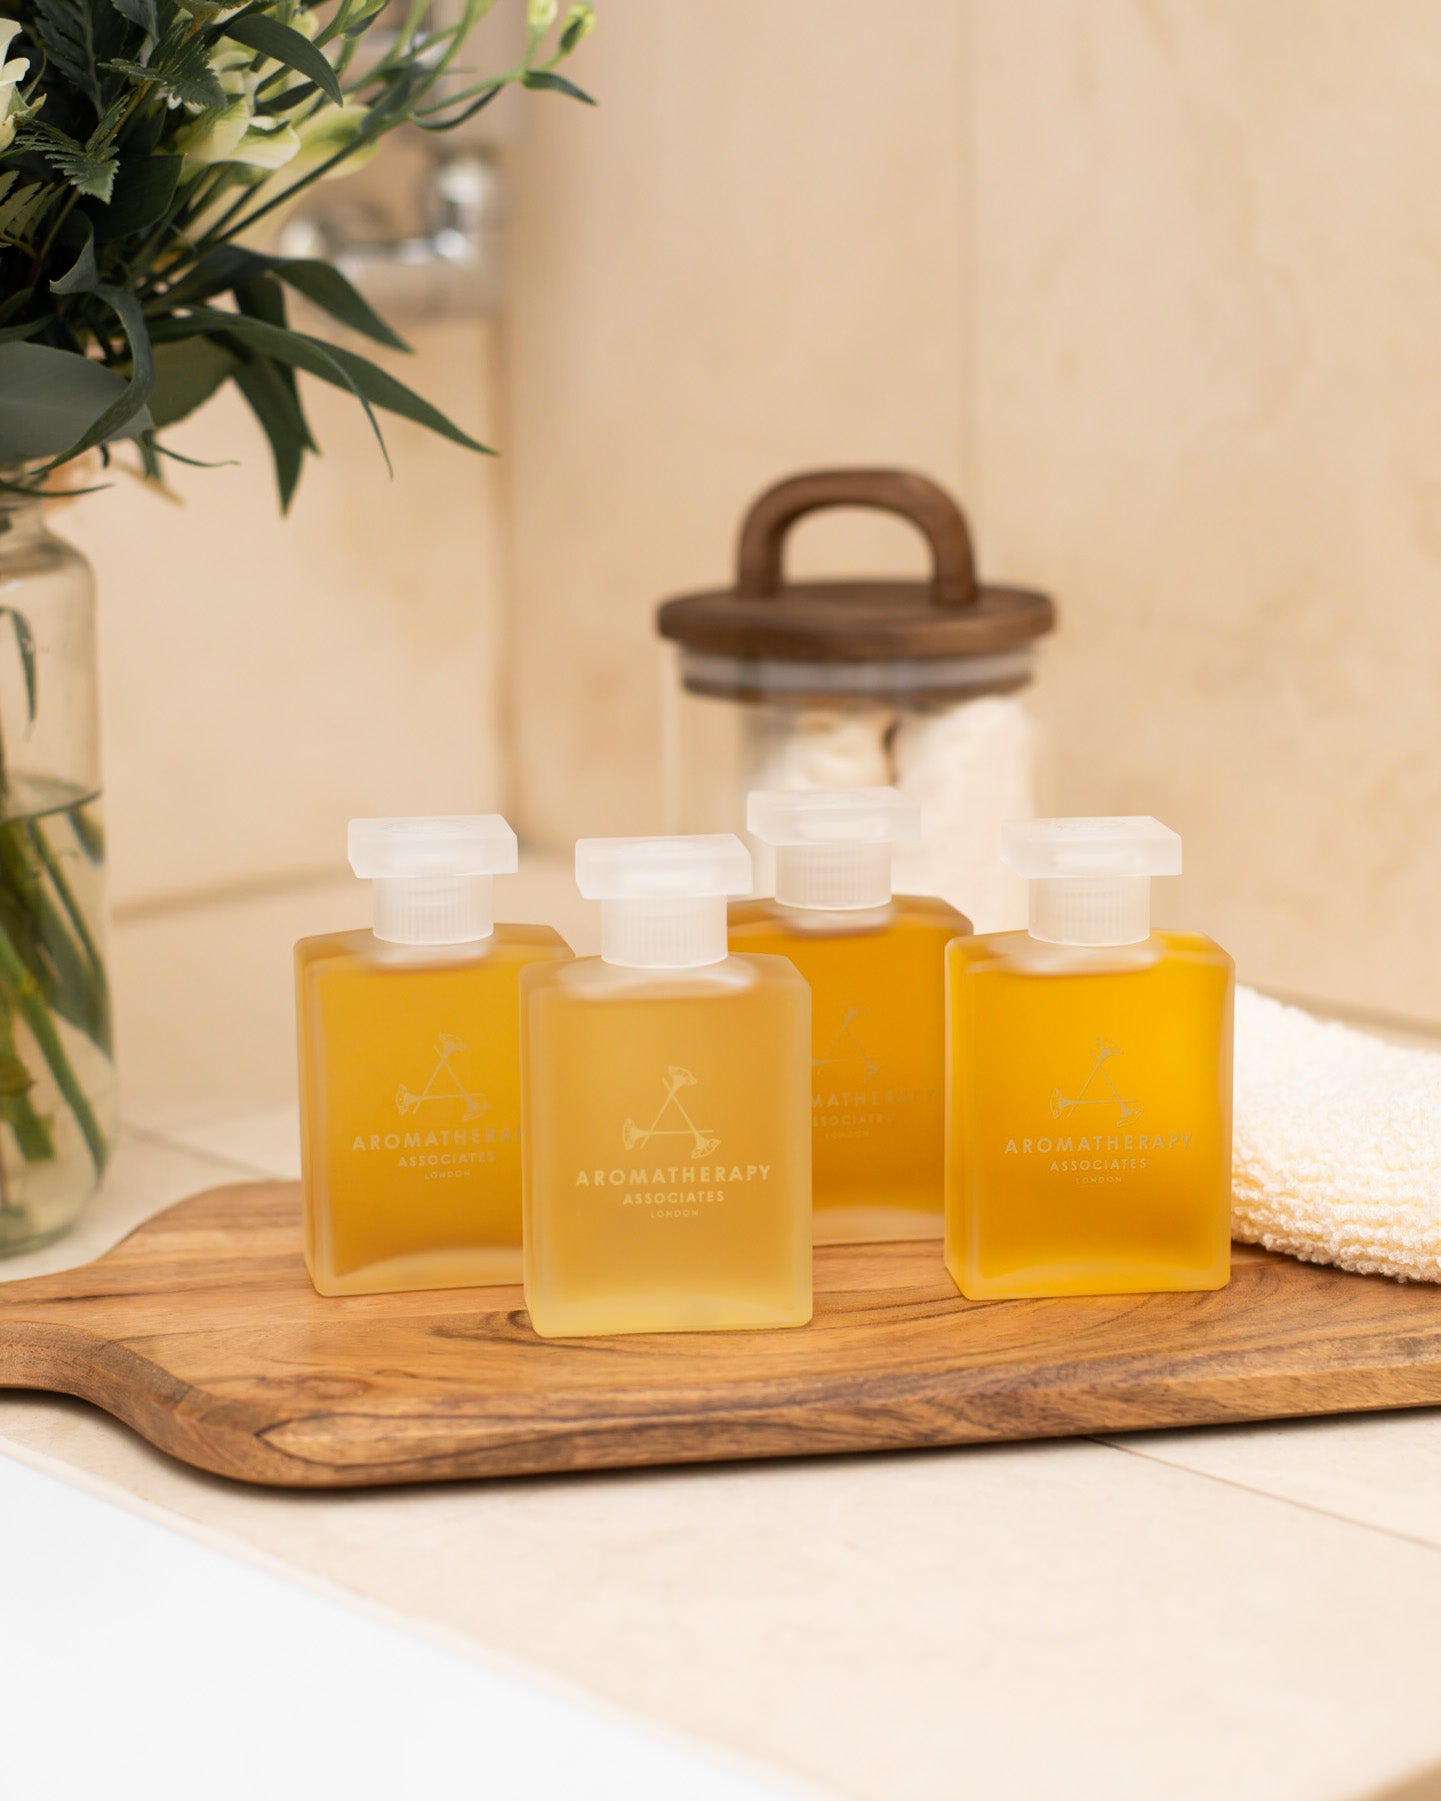 How to Use our Bath & Shower Oils